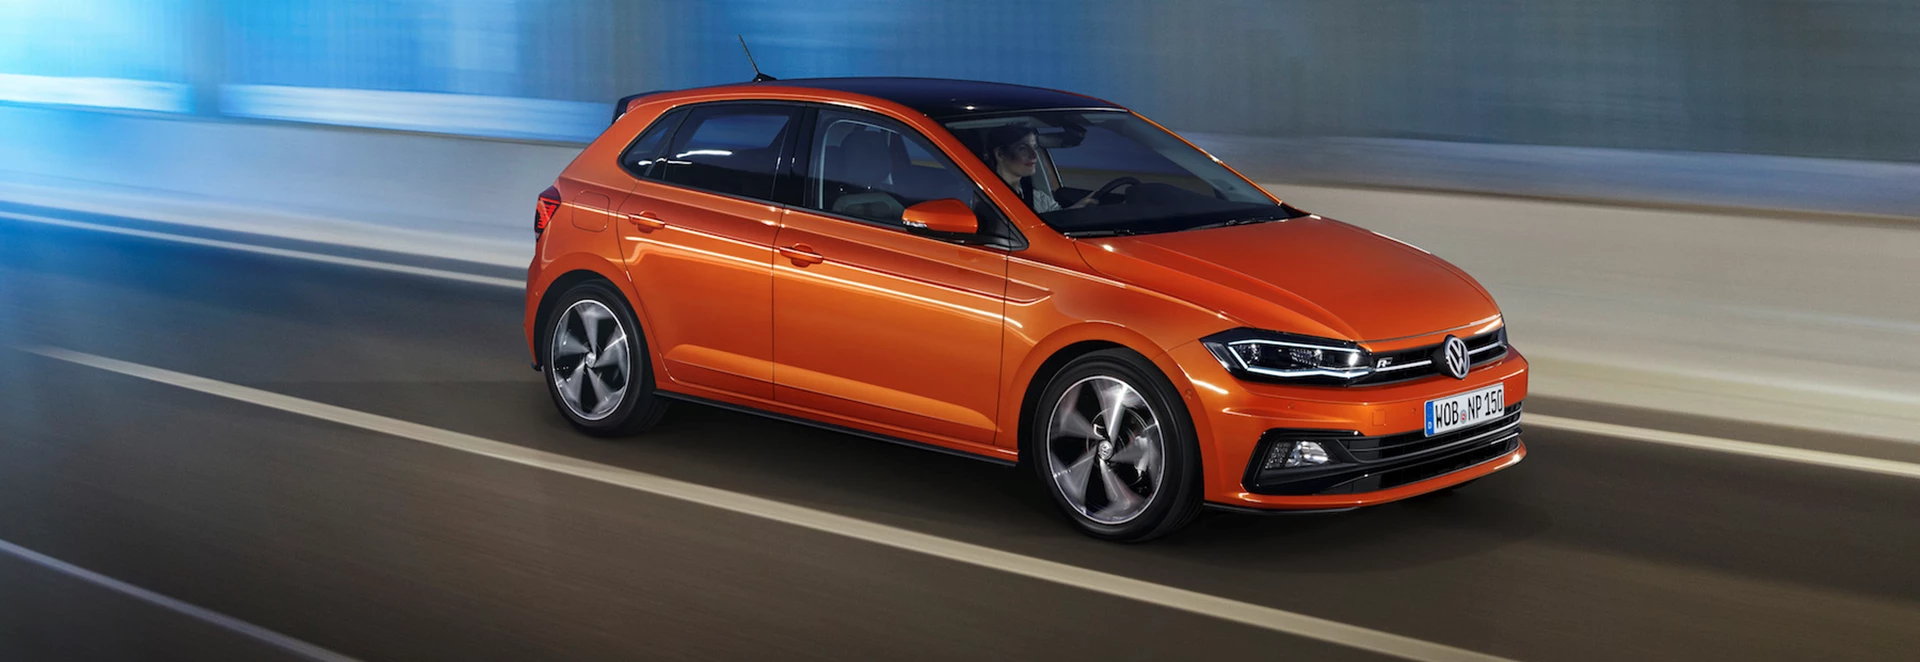 Order books open for Volkswagen Polo and T-Roc 